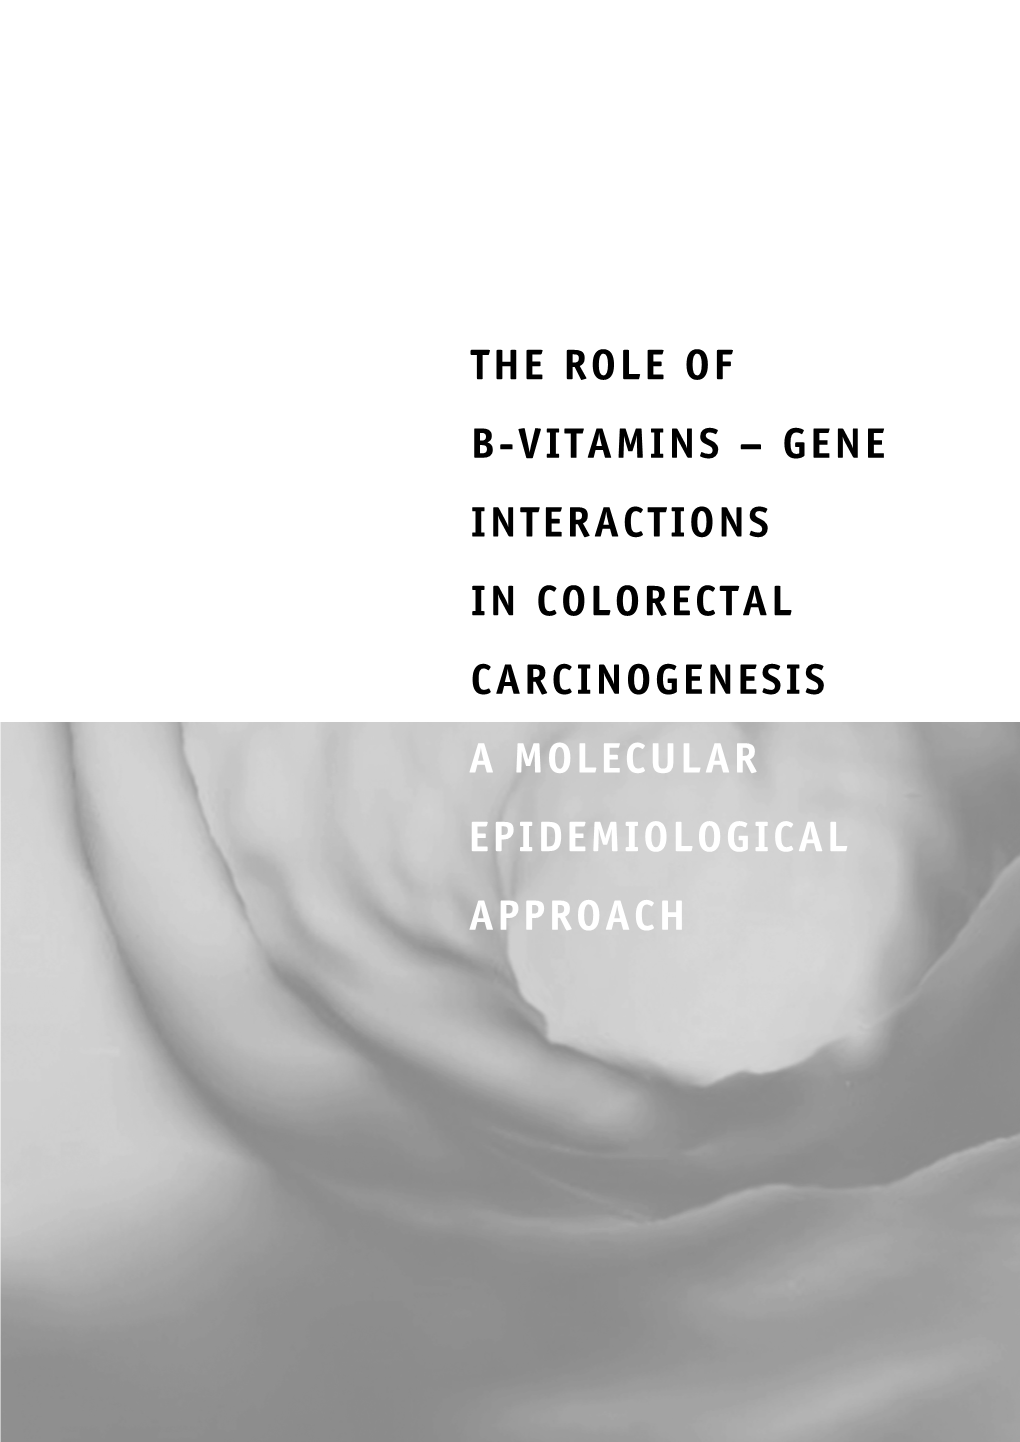 The Role of B-Vitamins – Gene Interactions in Colorectal Carcinogenesis a Molecular Epidemiological Approach